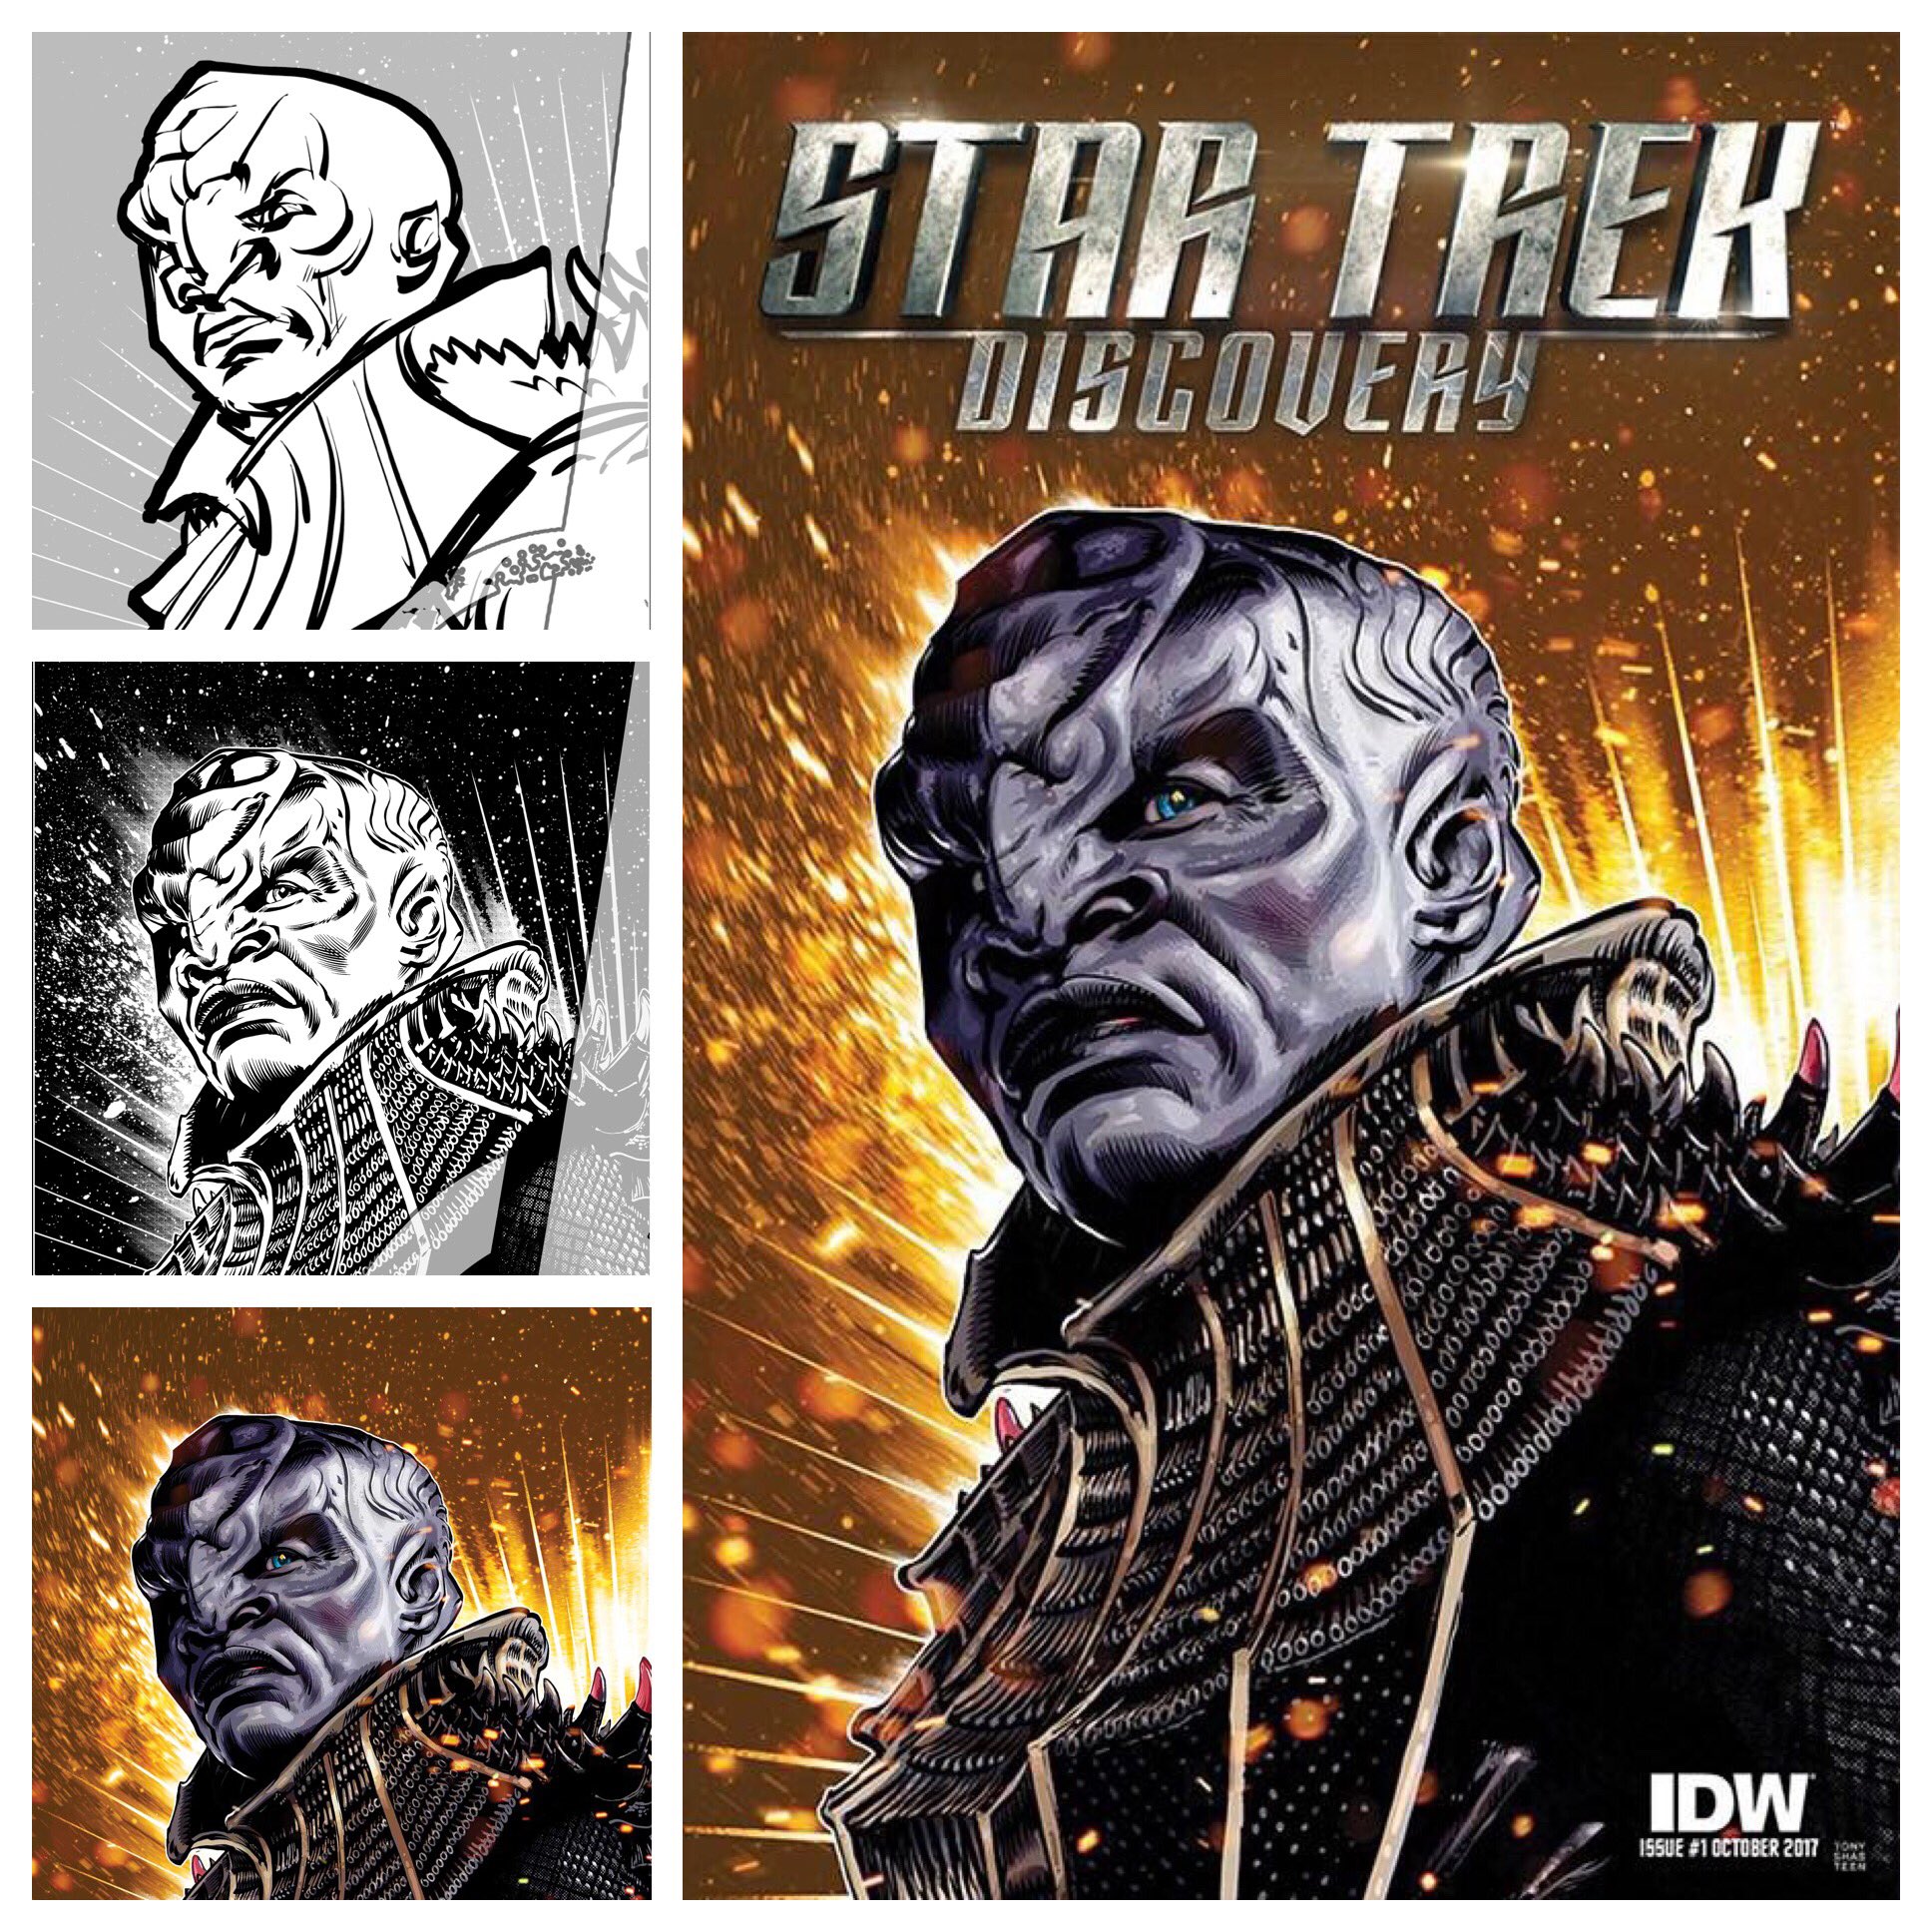 Shasteen’s process in creating the cover for  the new Star Trek: Discovery comic book